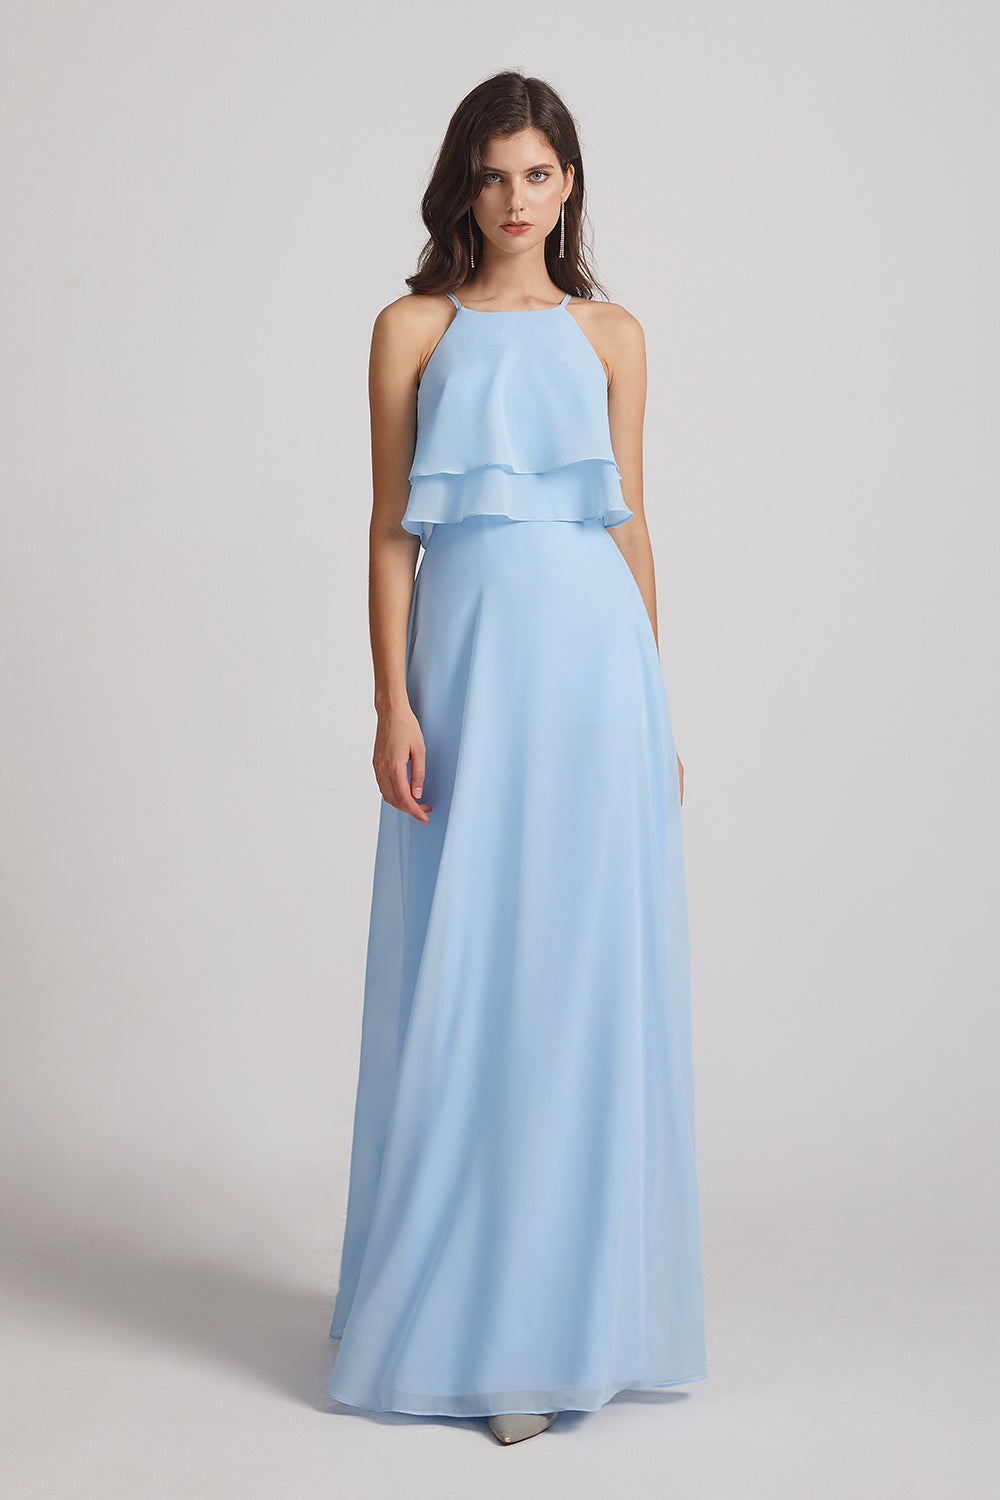 pleated chiffon bridesmaid gown